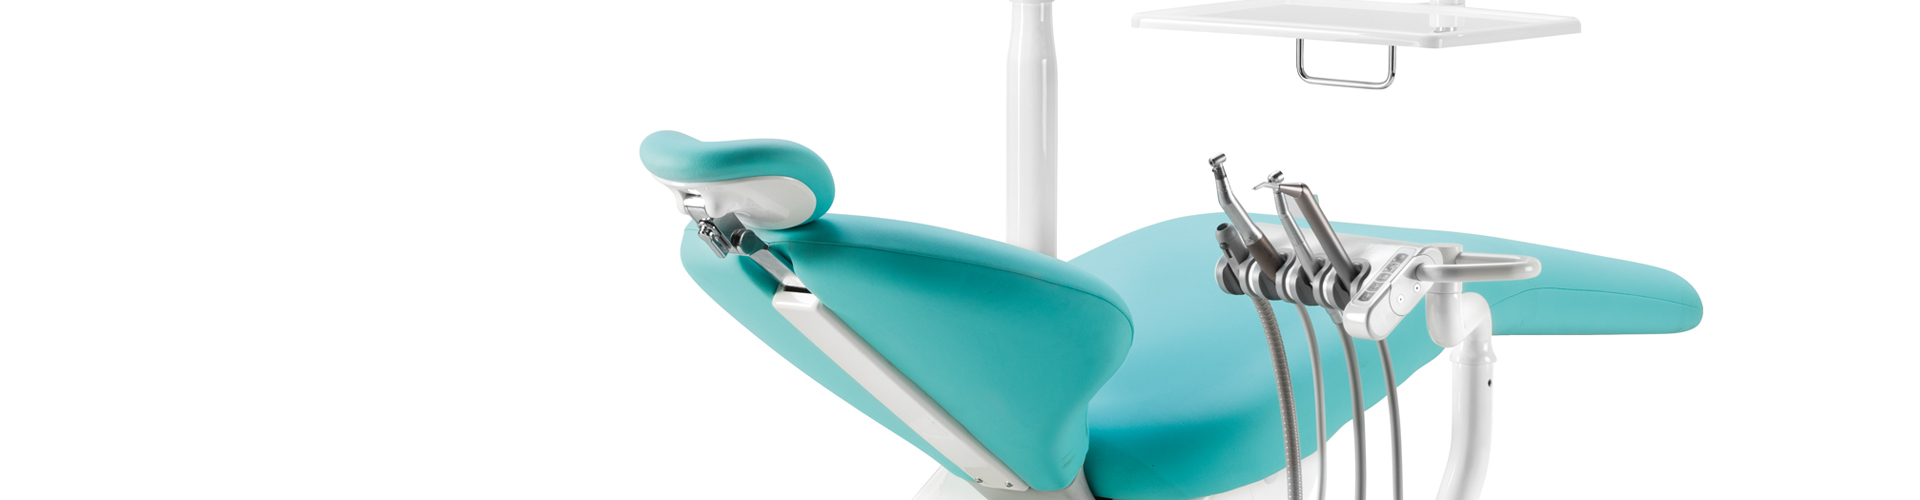 OMD - DUKE EASY - Fauteuil ambidextre pour orthodontie et chirurgie